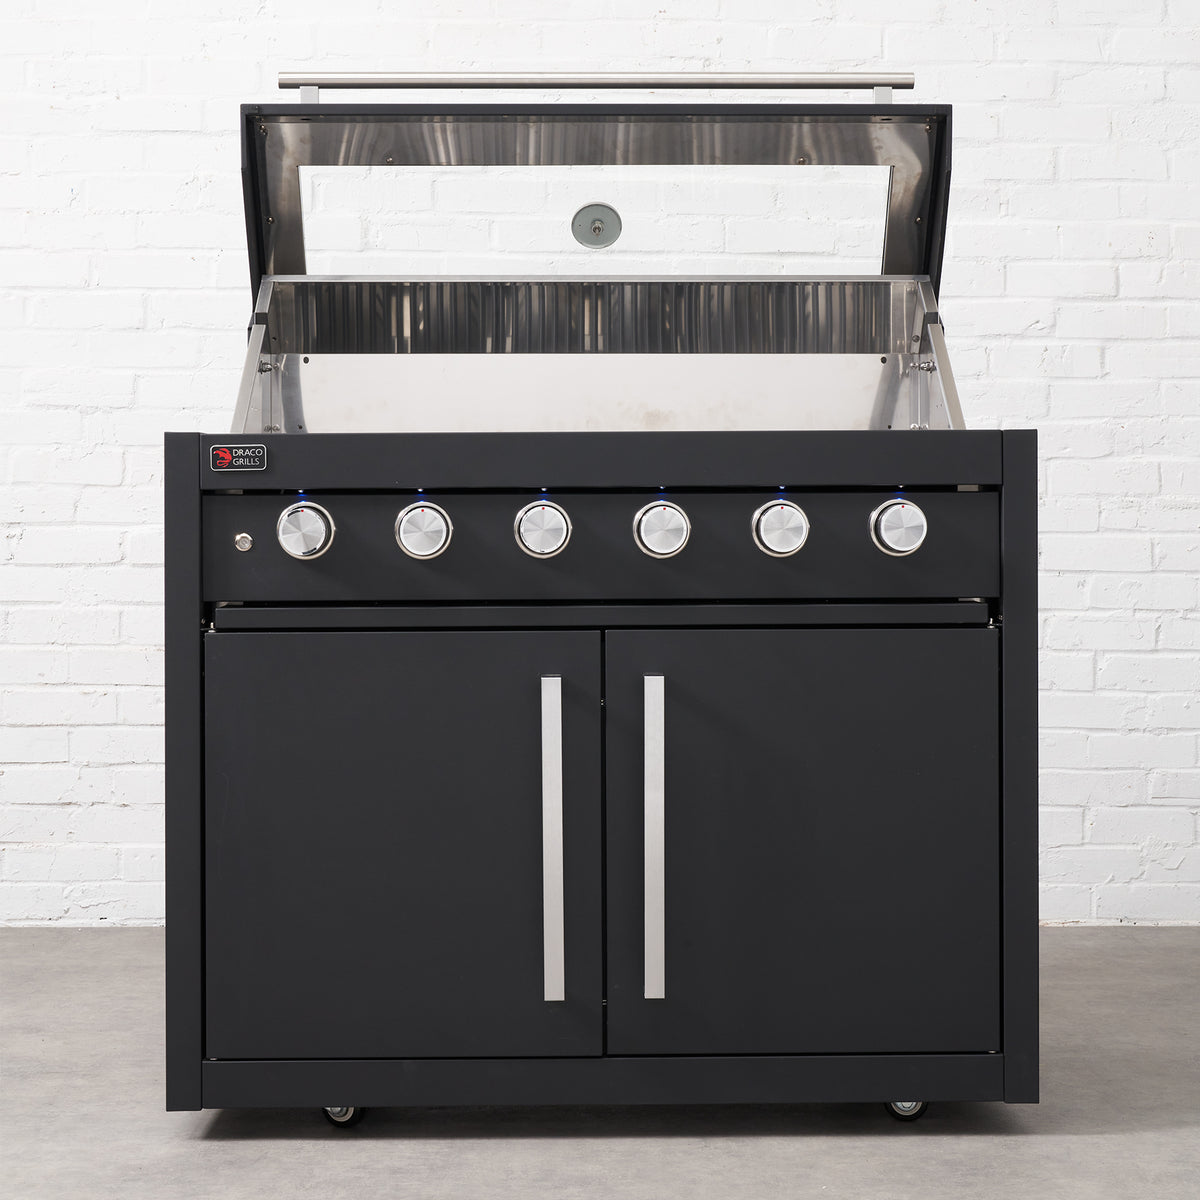 Draco Grills Fusion 6 Burner Black Outdoor Kitchen with Modular Single Fridge and Sink